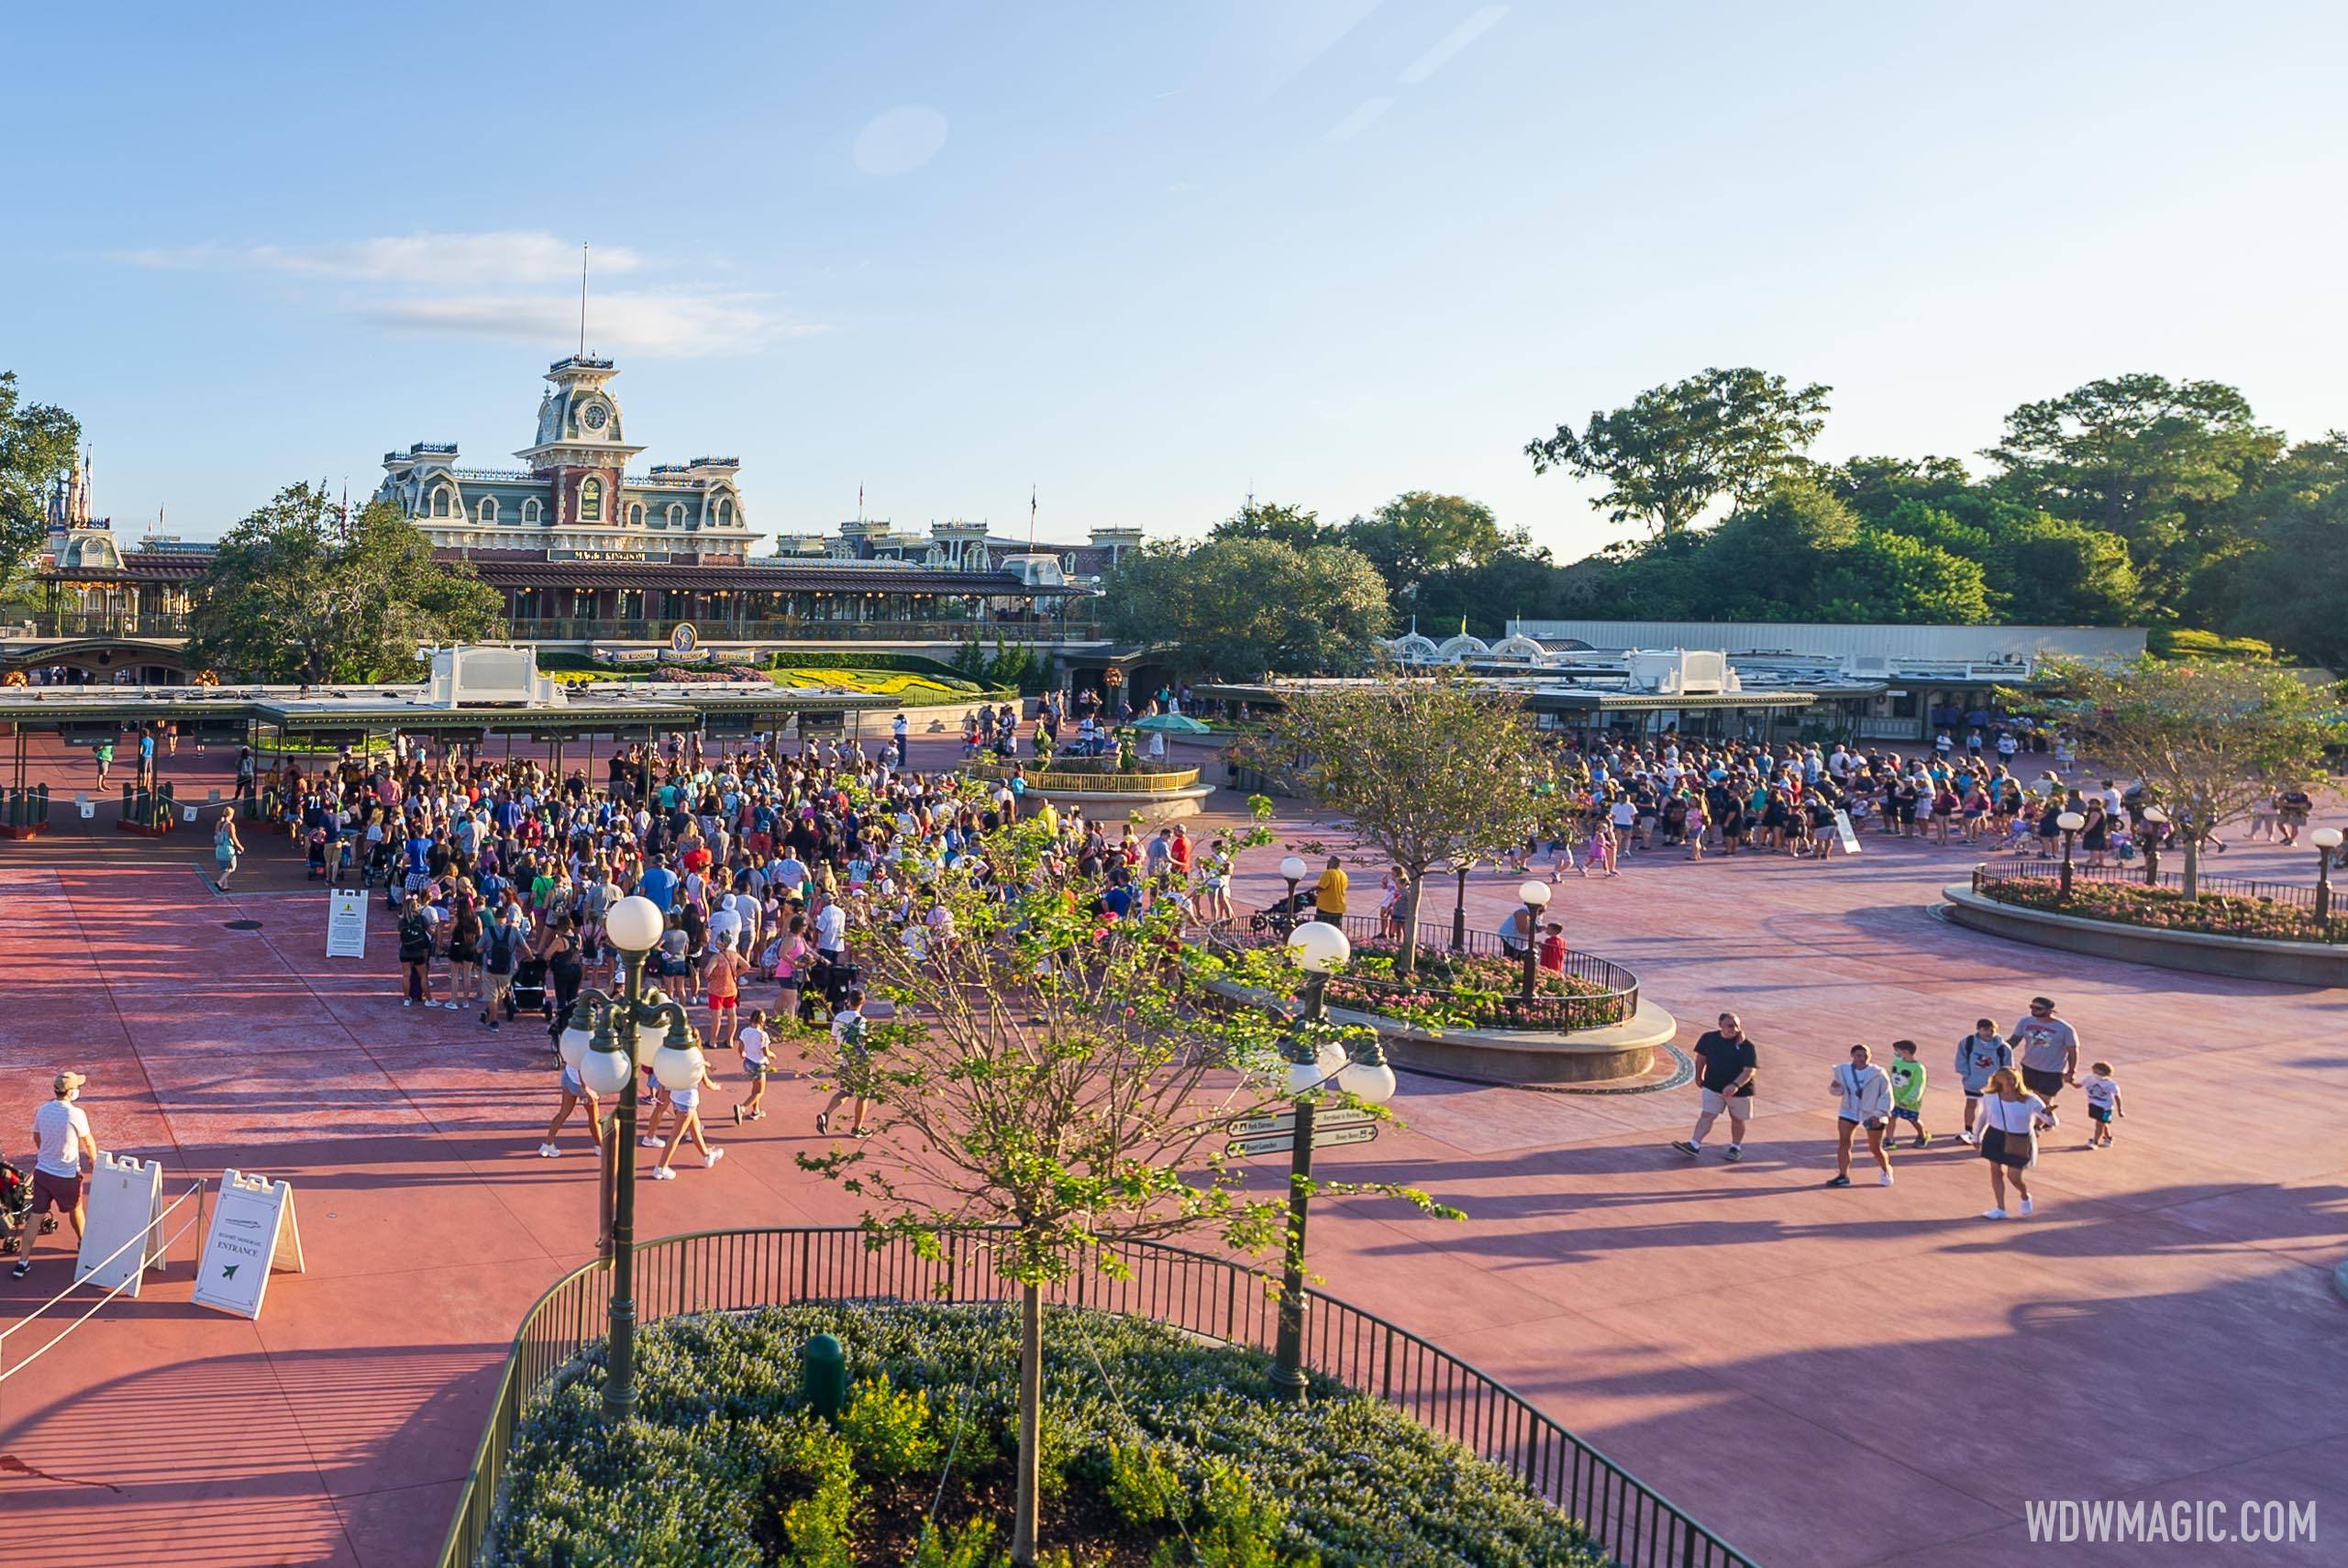 Another offsite hotel joins Disney hotels for Early Morning Hours at Walt Disney World theme parks through 2024